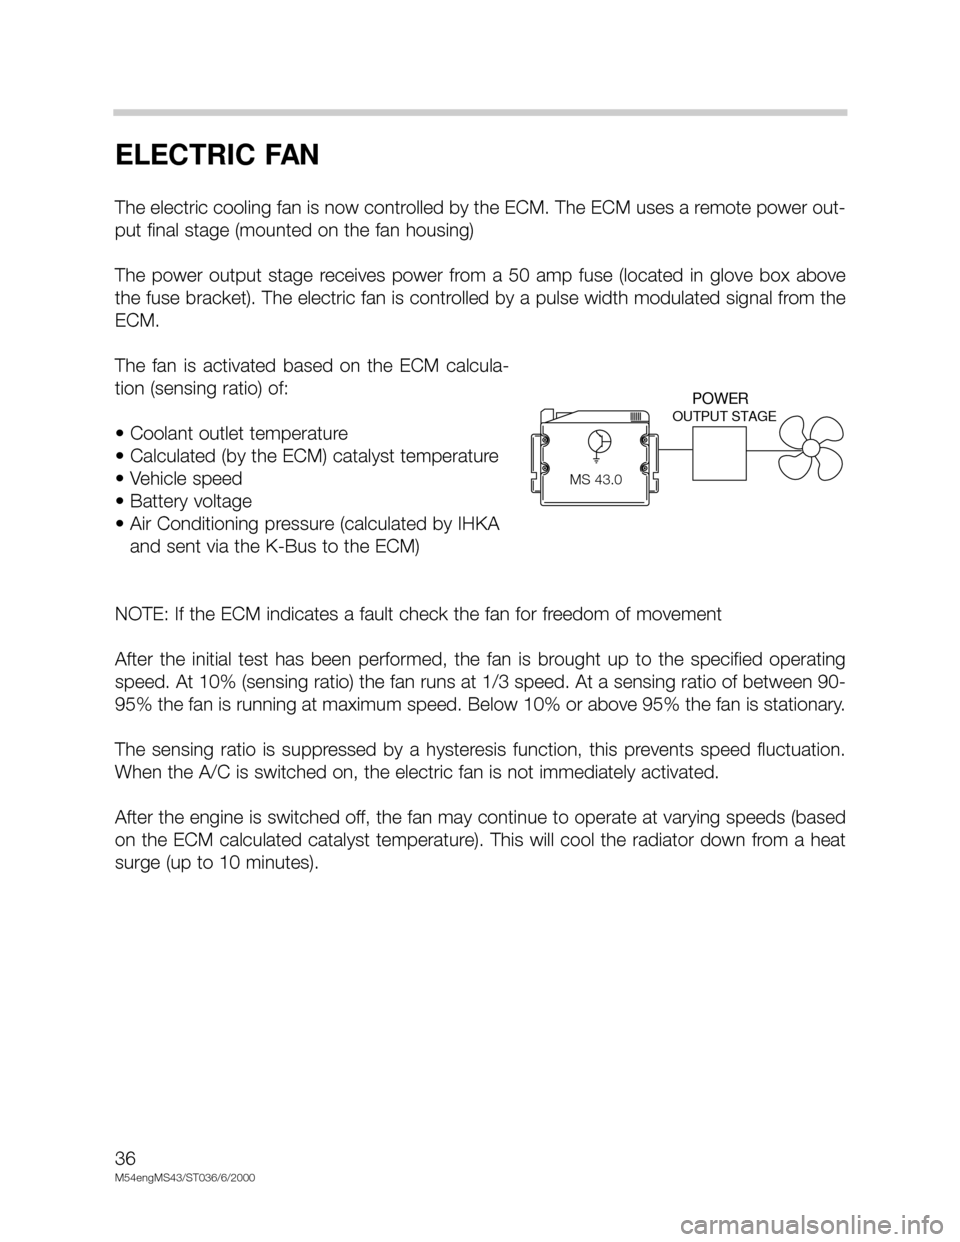 BMW X5 2003 E53 M54 Engine Workshop Manual 36
M54engMS43/ST036/6/2000
ELECTRIC FAN
The electric cooling fan is now controlled by the ECM. The ECM uses a remote power out-
put final stage (mounted on the fan housing)
The  power  output  stage  